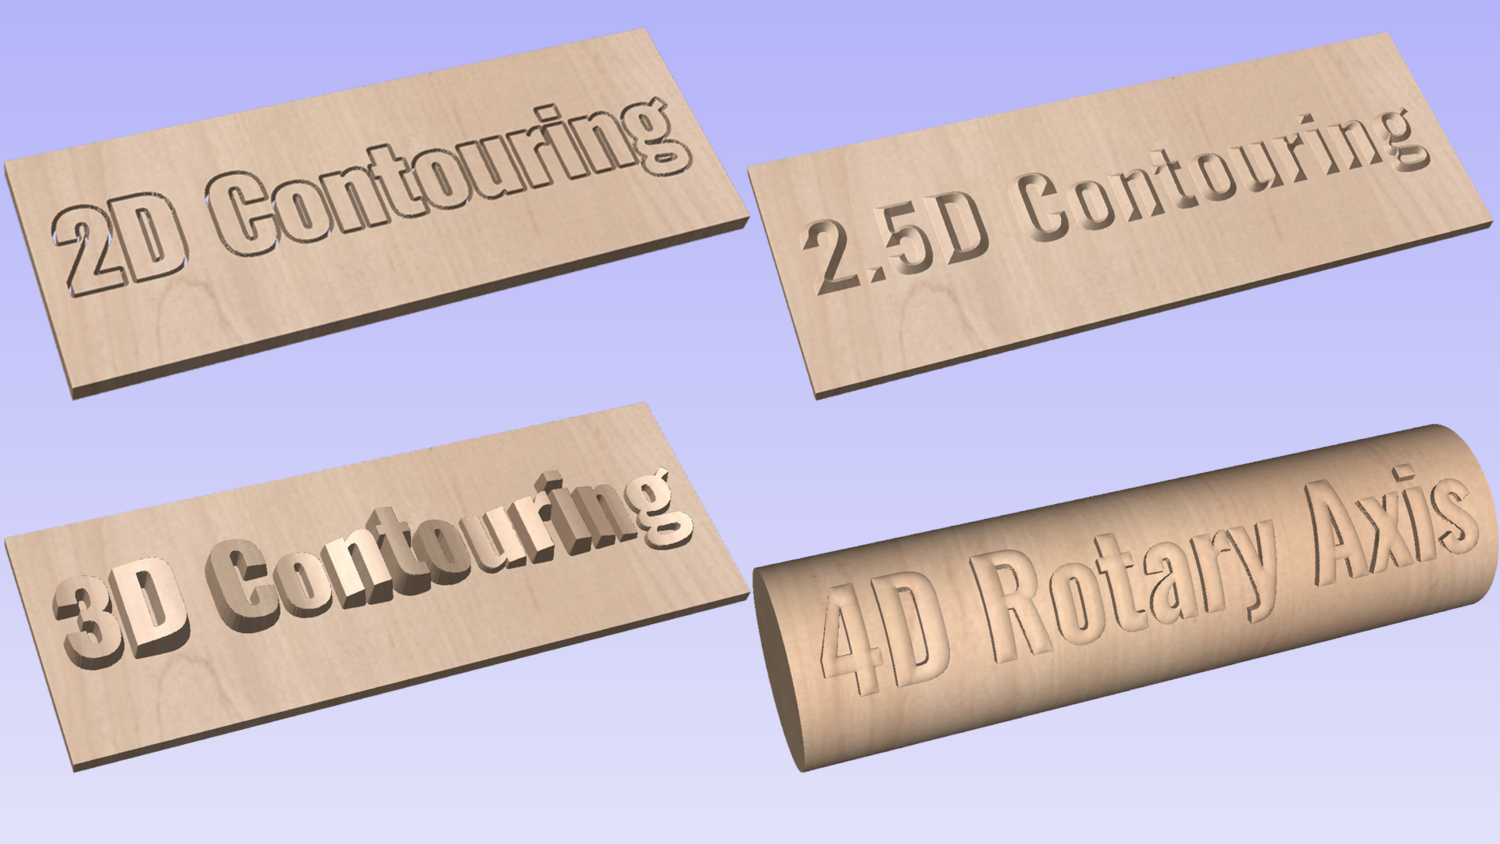 What Is the Difference Between 2D, 2.5D, and 3D Contouring? — Learn Your CNC